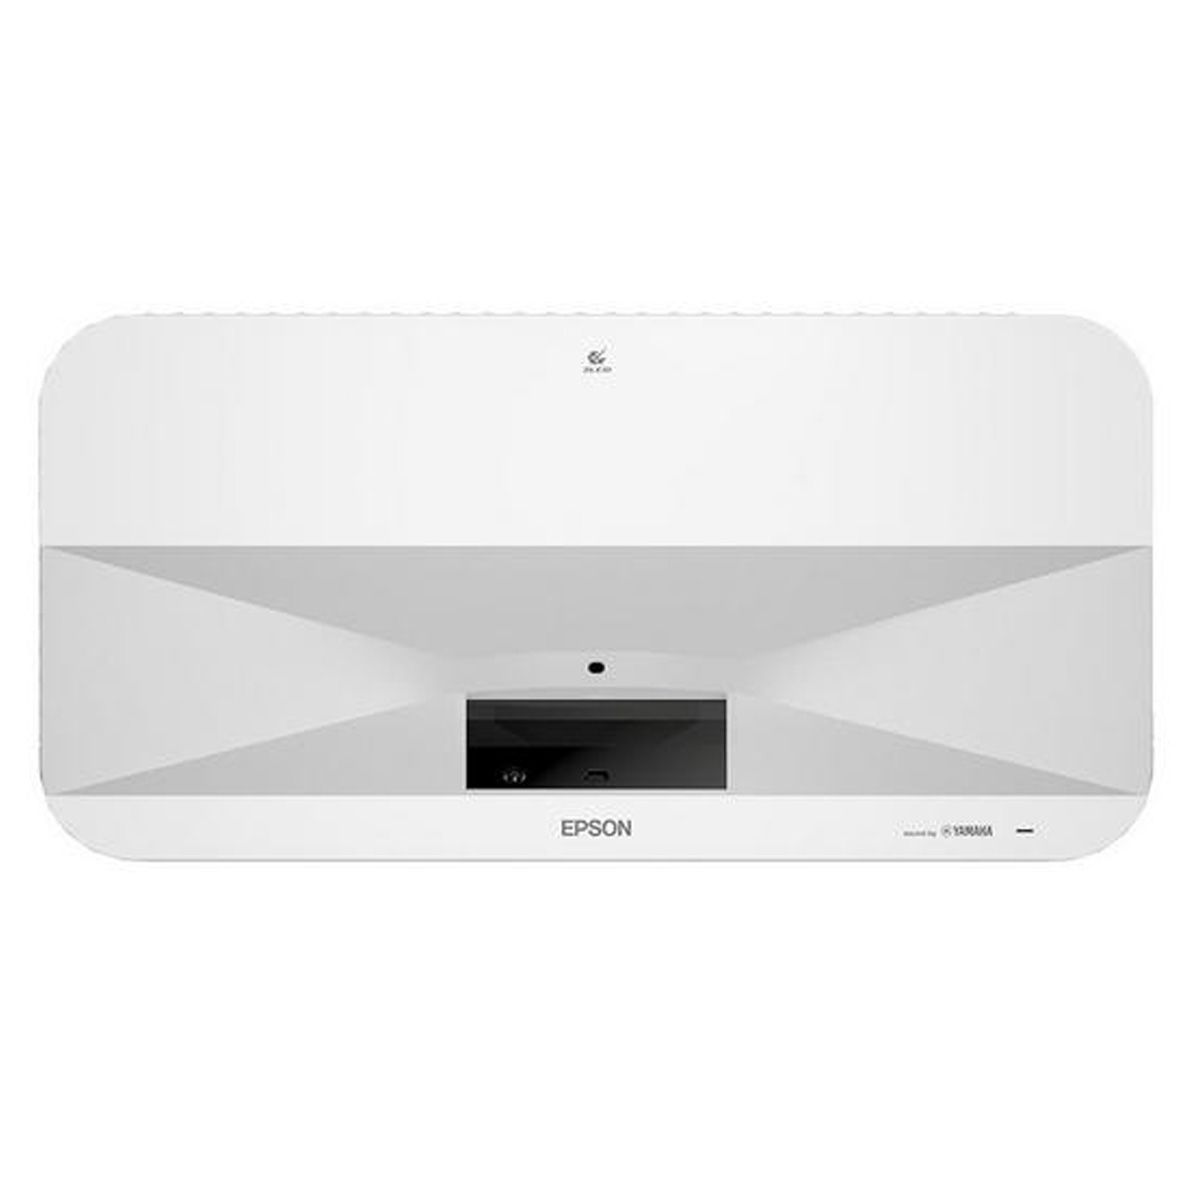 Epson LS800 Super Ultra Short Throw Projector - White - top view